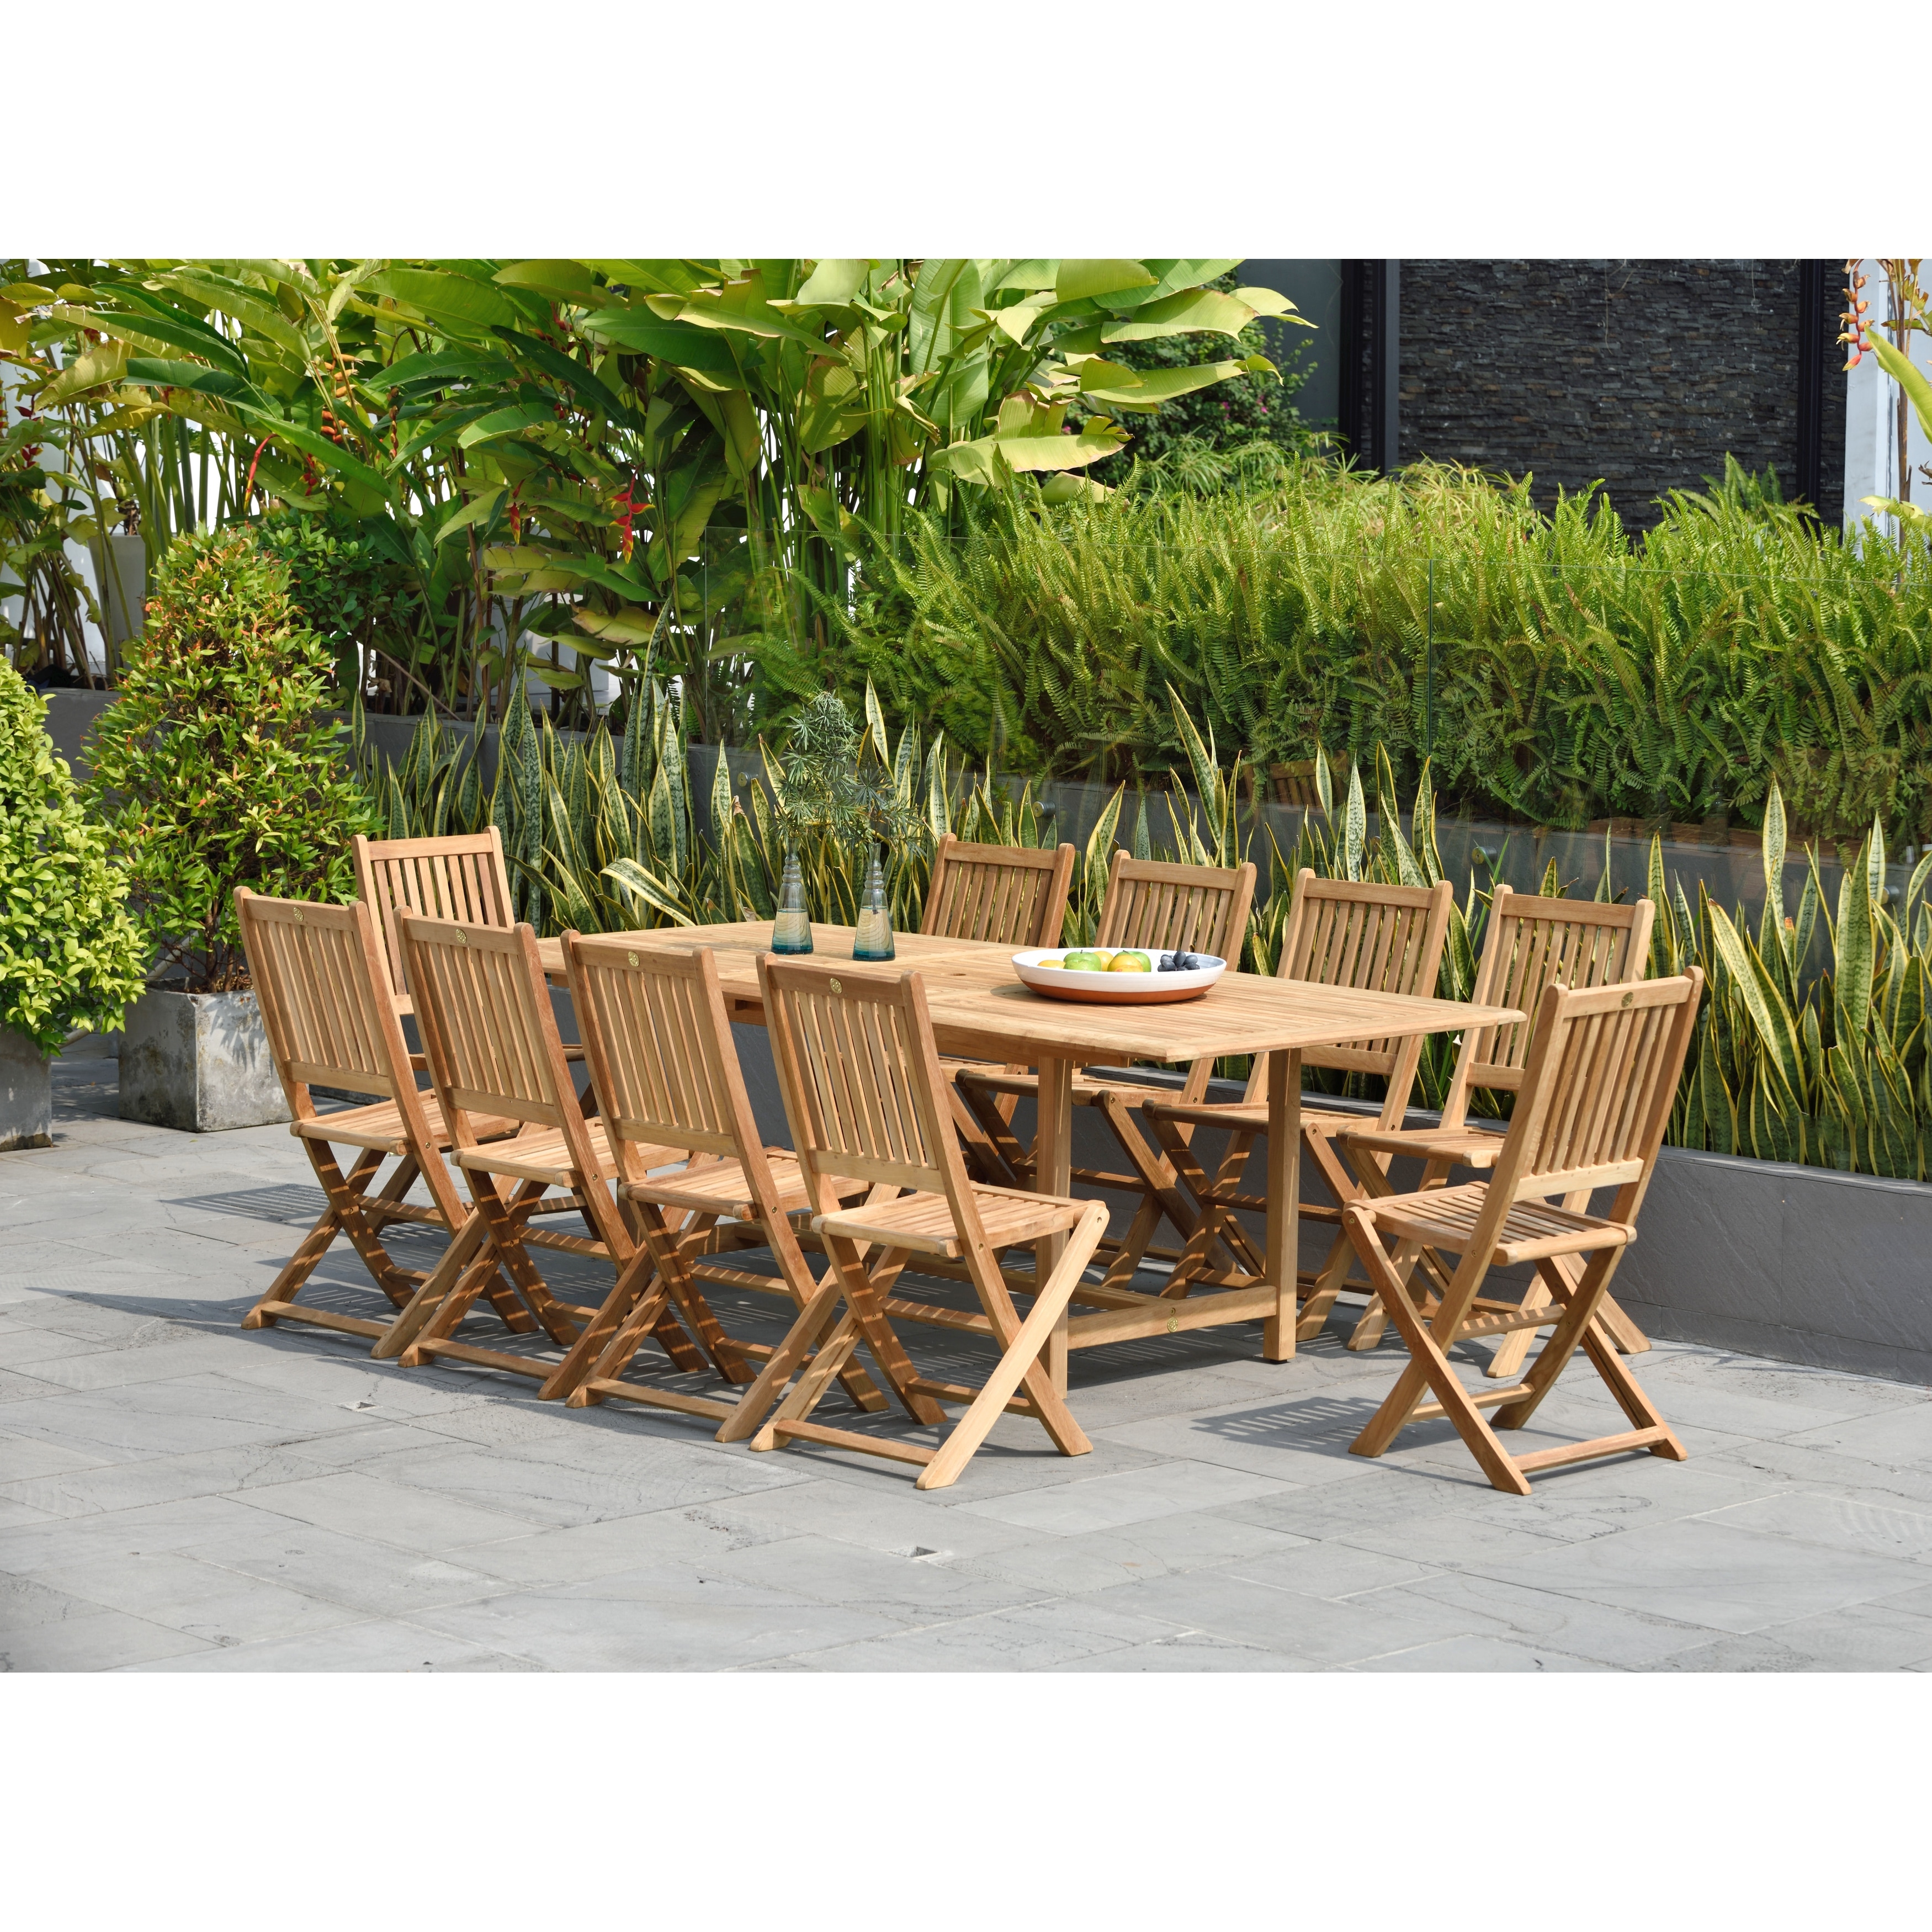 Amazonia 11pc Fsc Certified Solid Teak Wood Outdoor Patio Dining Set - 11 Piece